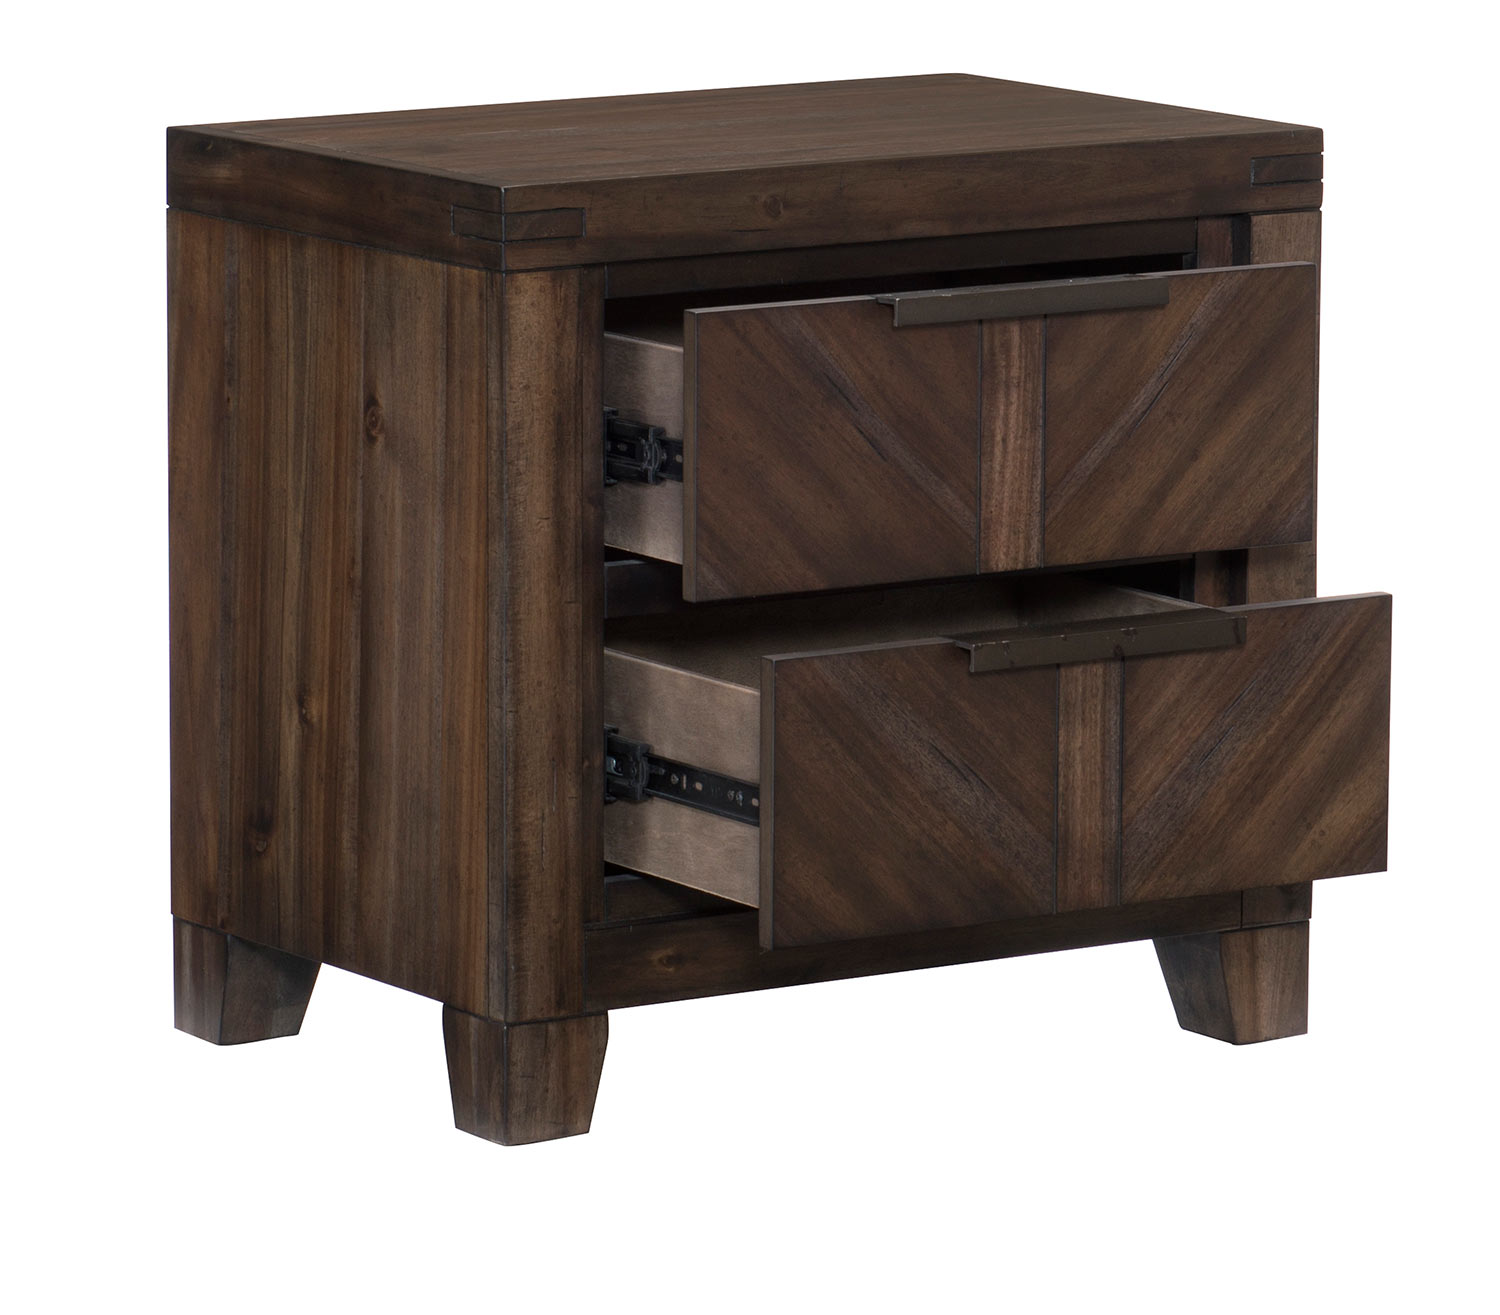 Homelegance Parnell Night Stand - Rustic Cherry